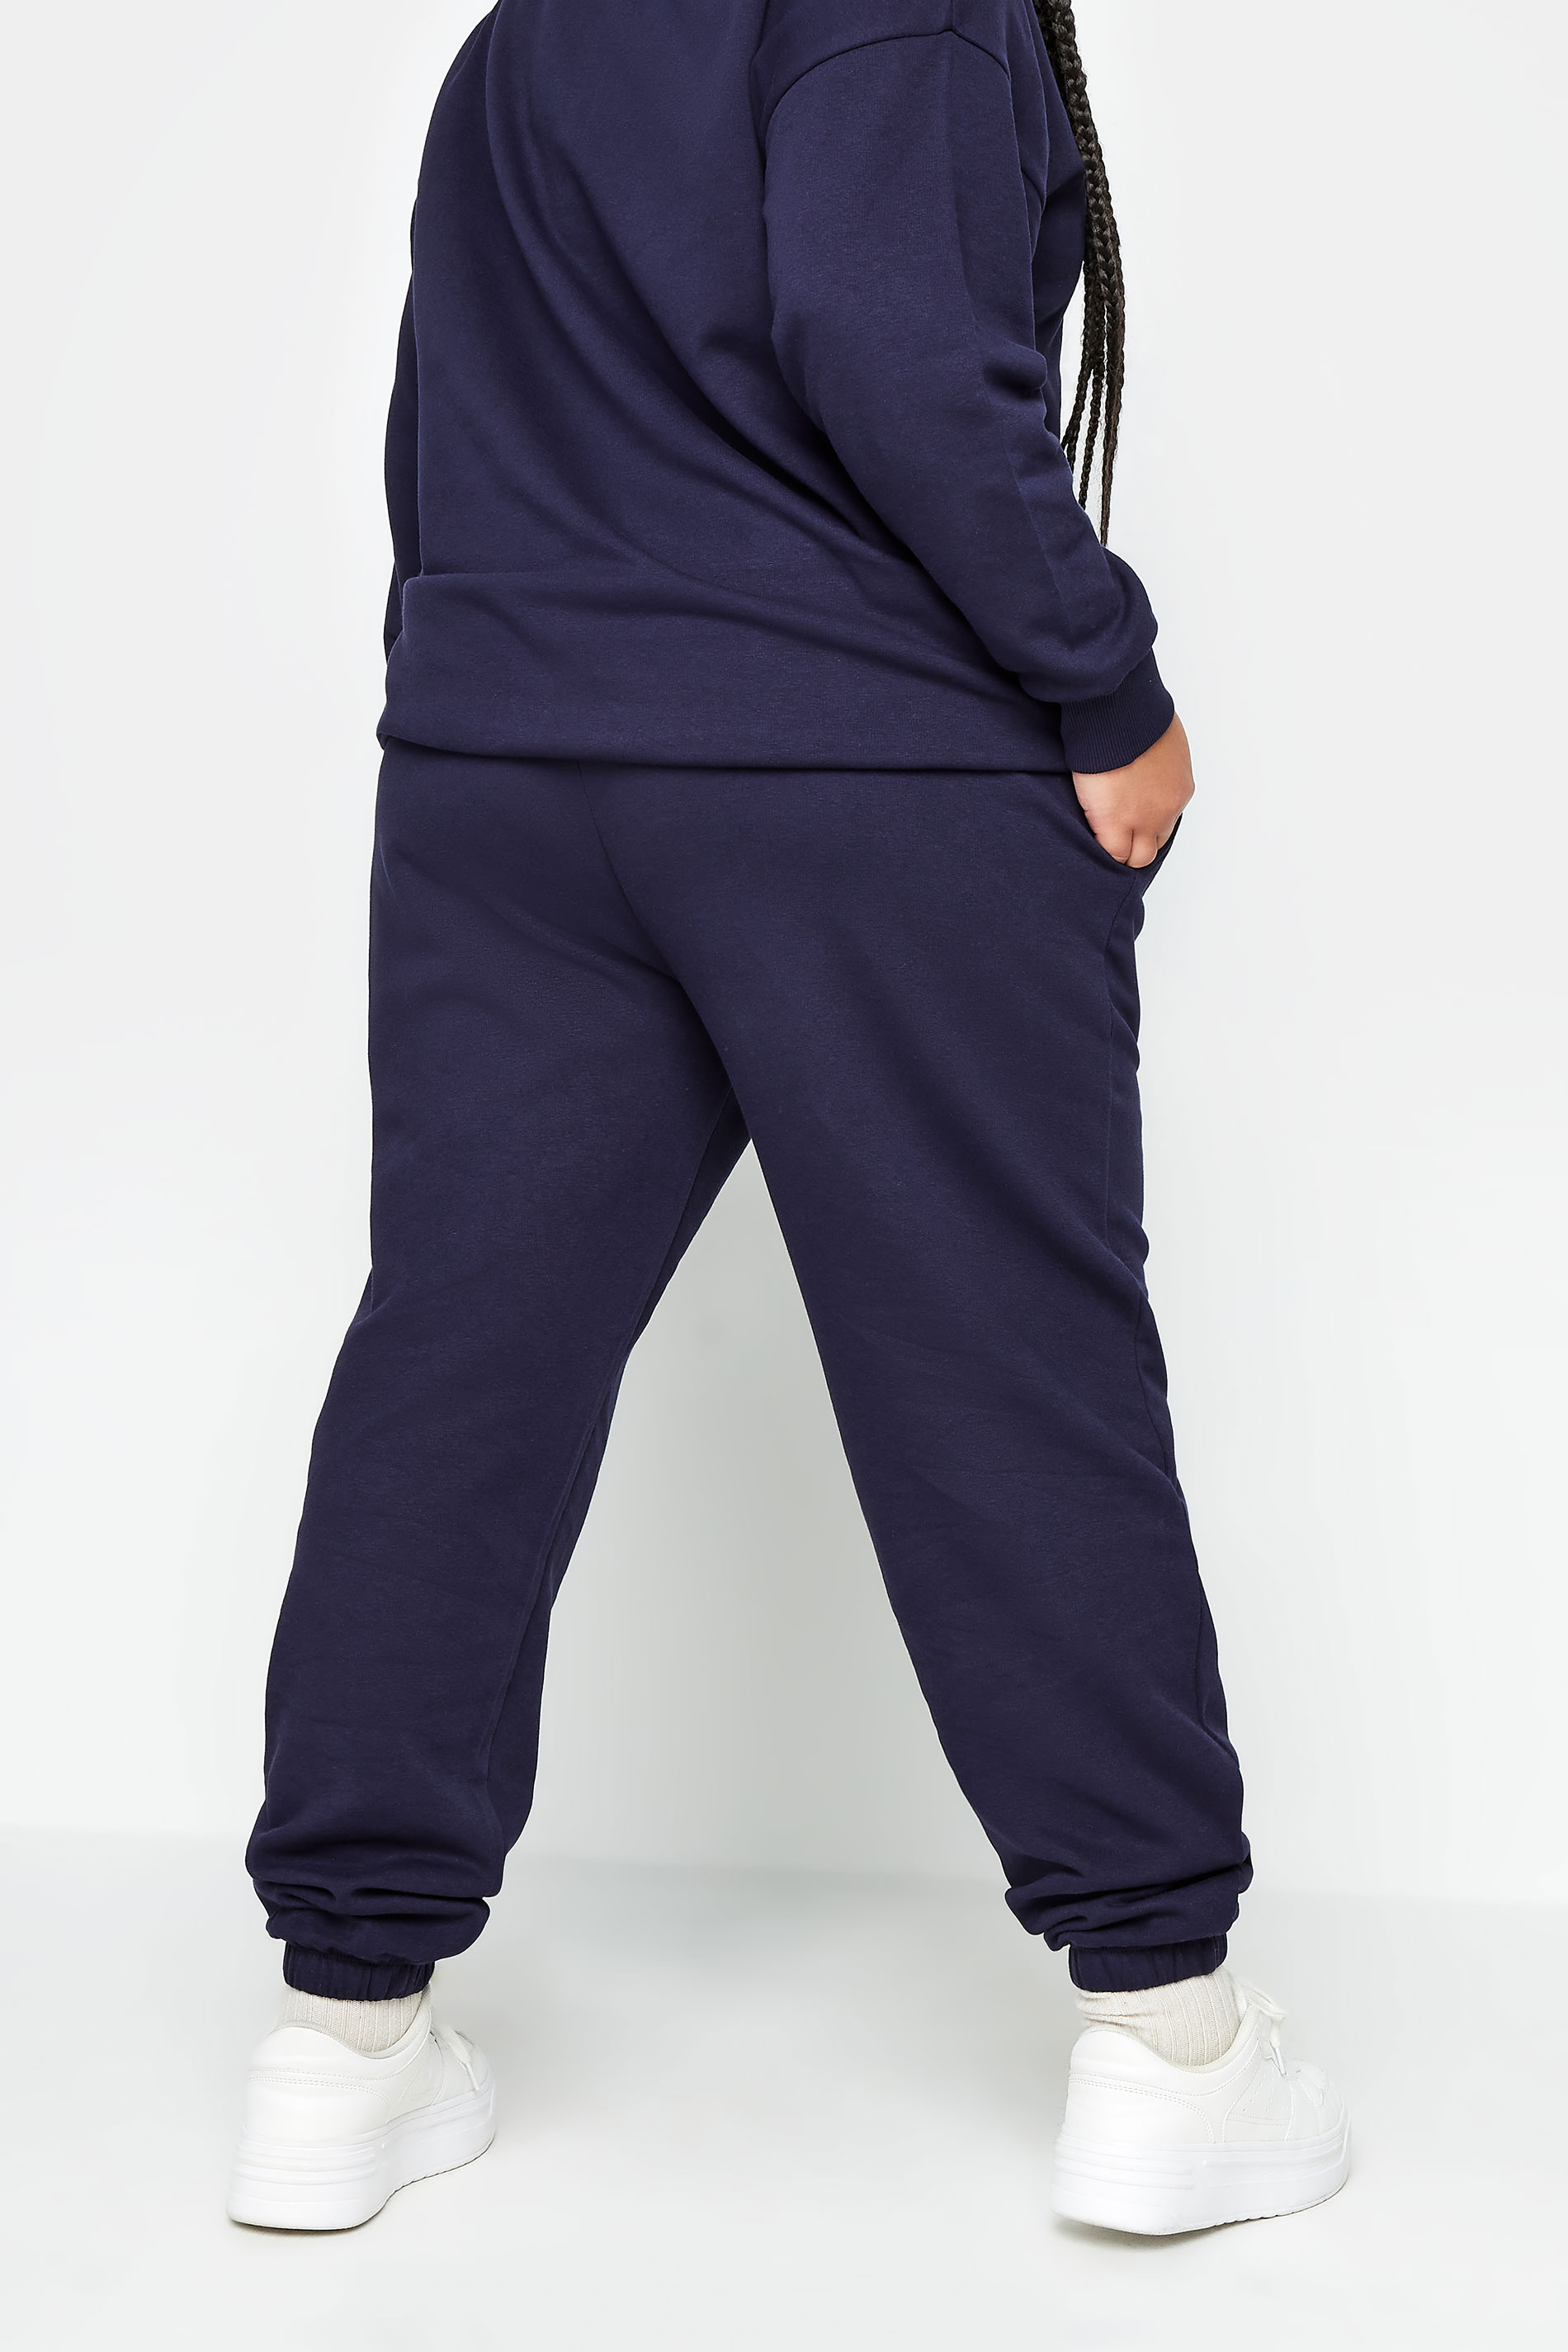 YOURS Plus Size Navy Blue Straight Leg Joggers